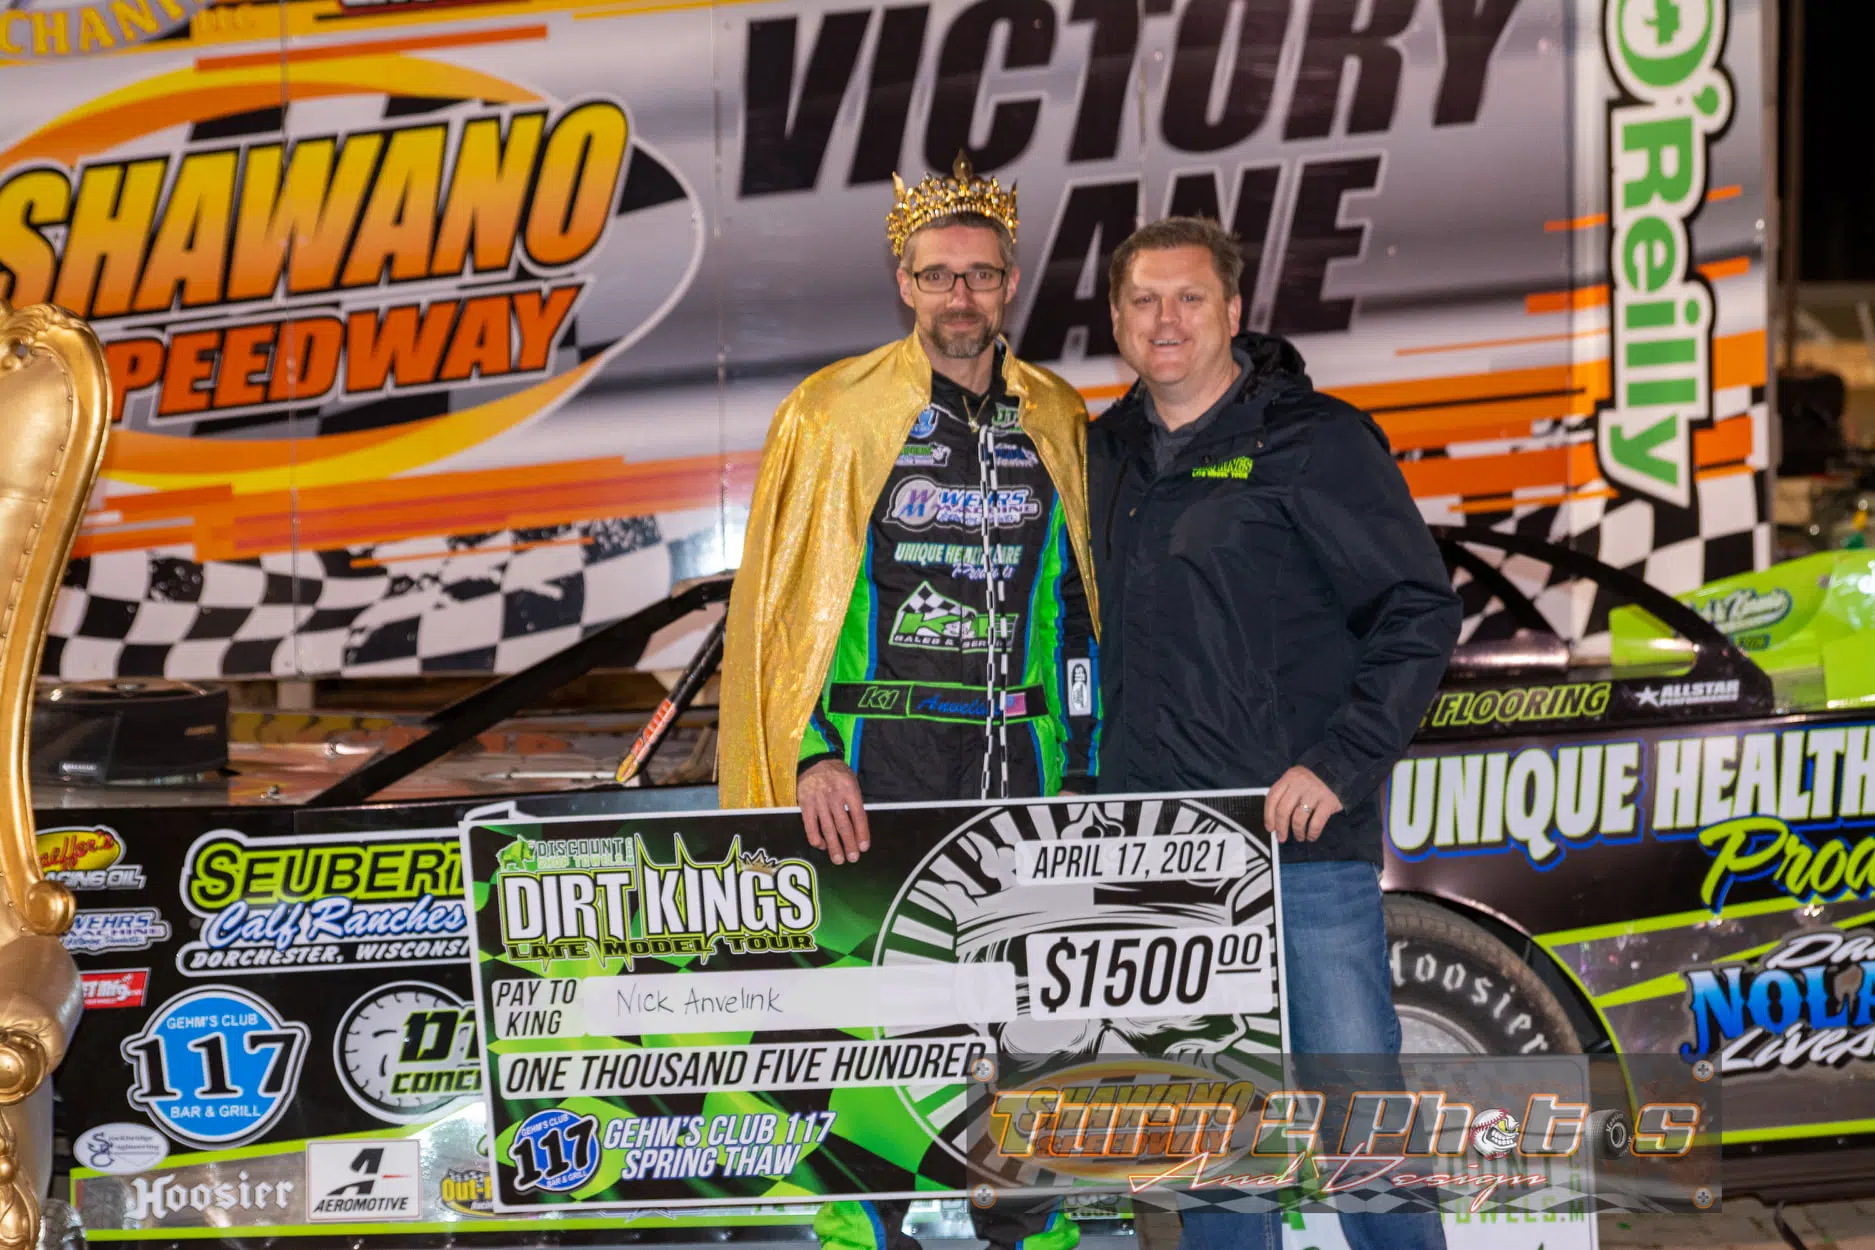 Nick Anvelink is King in the 2021 Opener At Shawano Speedway